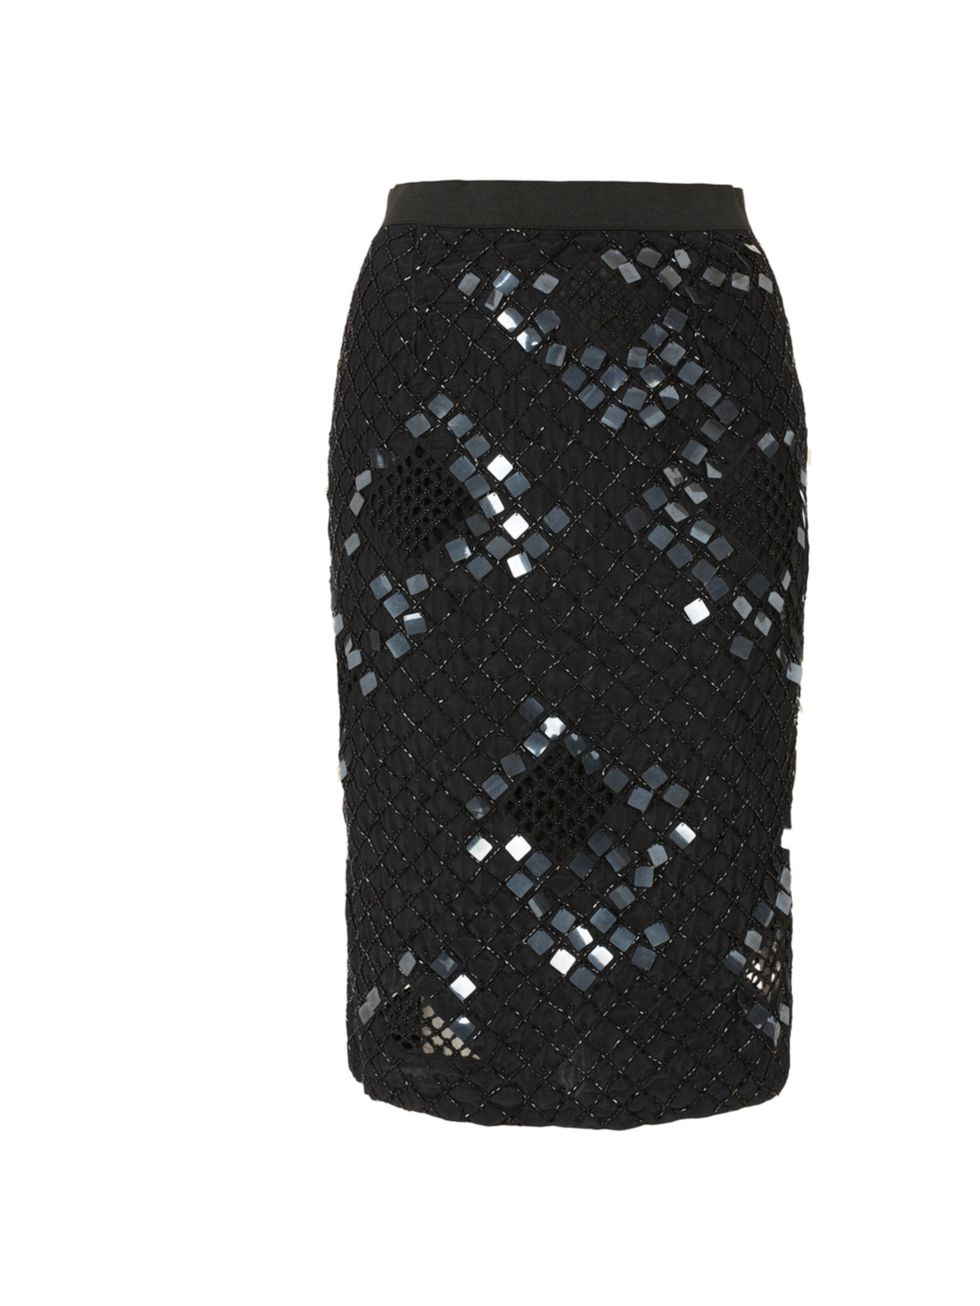 <p>'Tis the season to shine. So make like Prada (and now Topshop) and invest in huge crystal embellishment... Topshop Premium beaded skirt, £75</p><p><a href="http://shopping.elleuk.com/browse?fts=topshop+premium+pencil+skirt">BUY NOW</a></p>